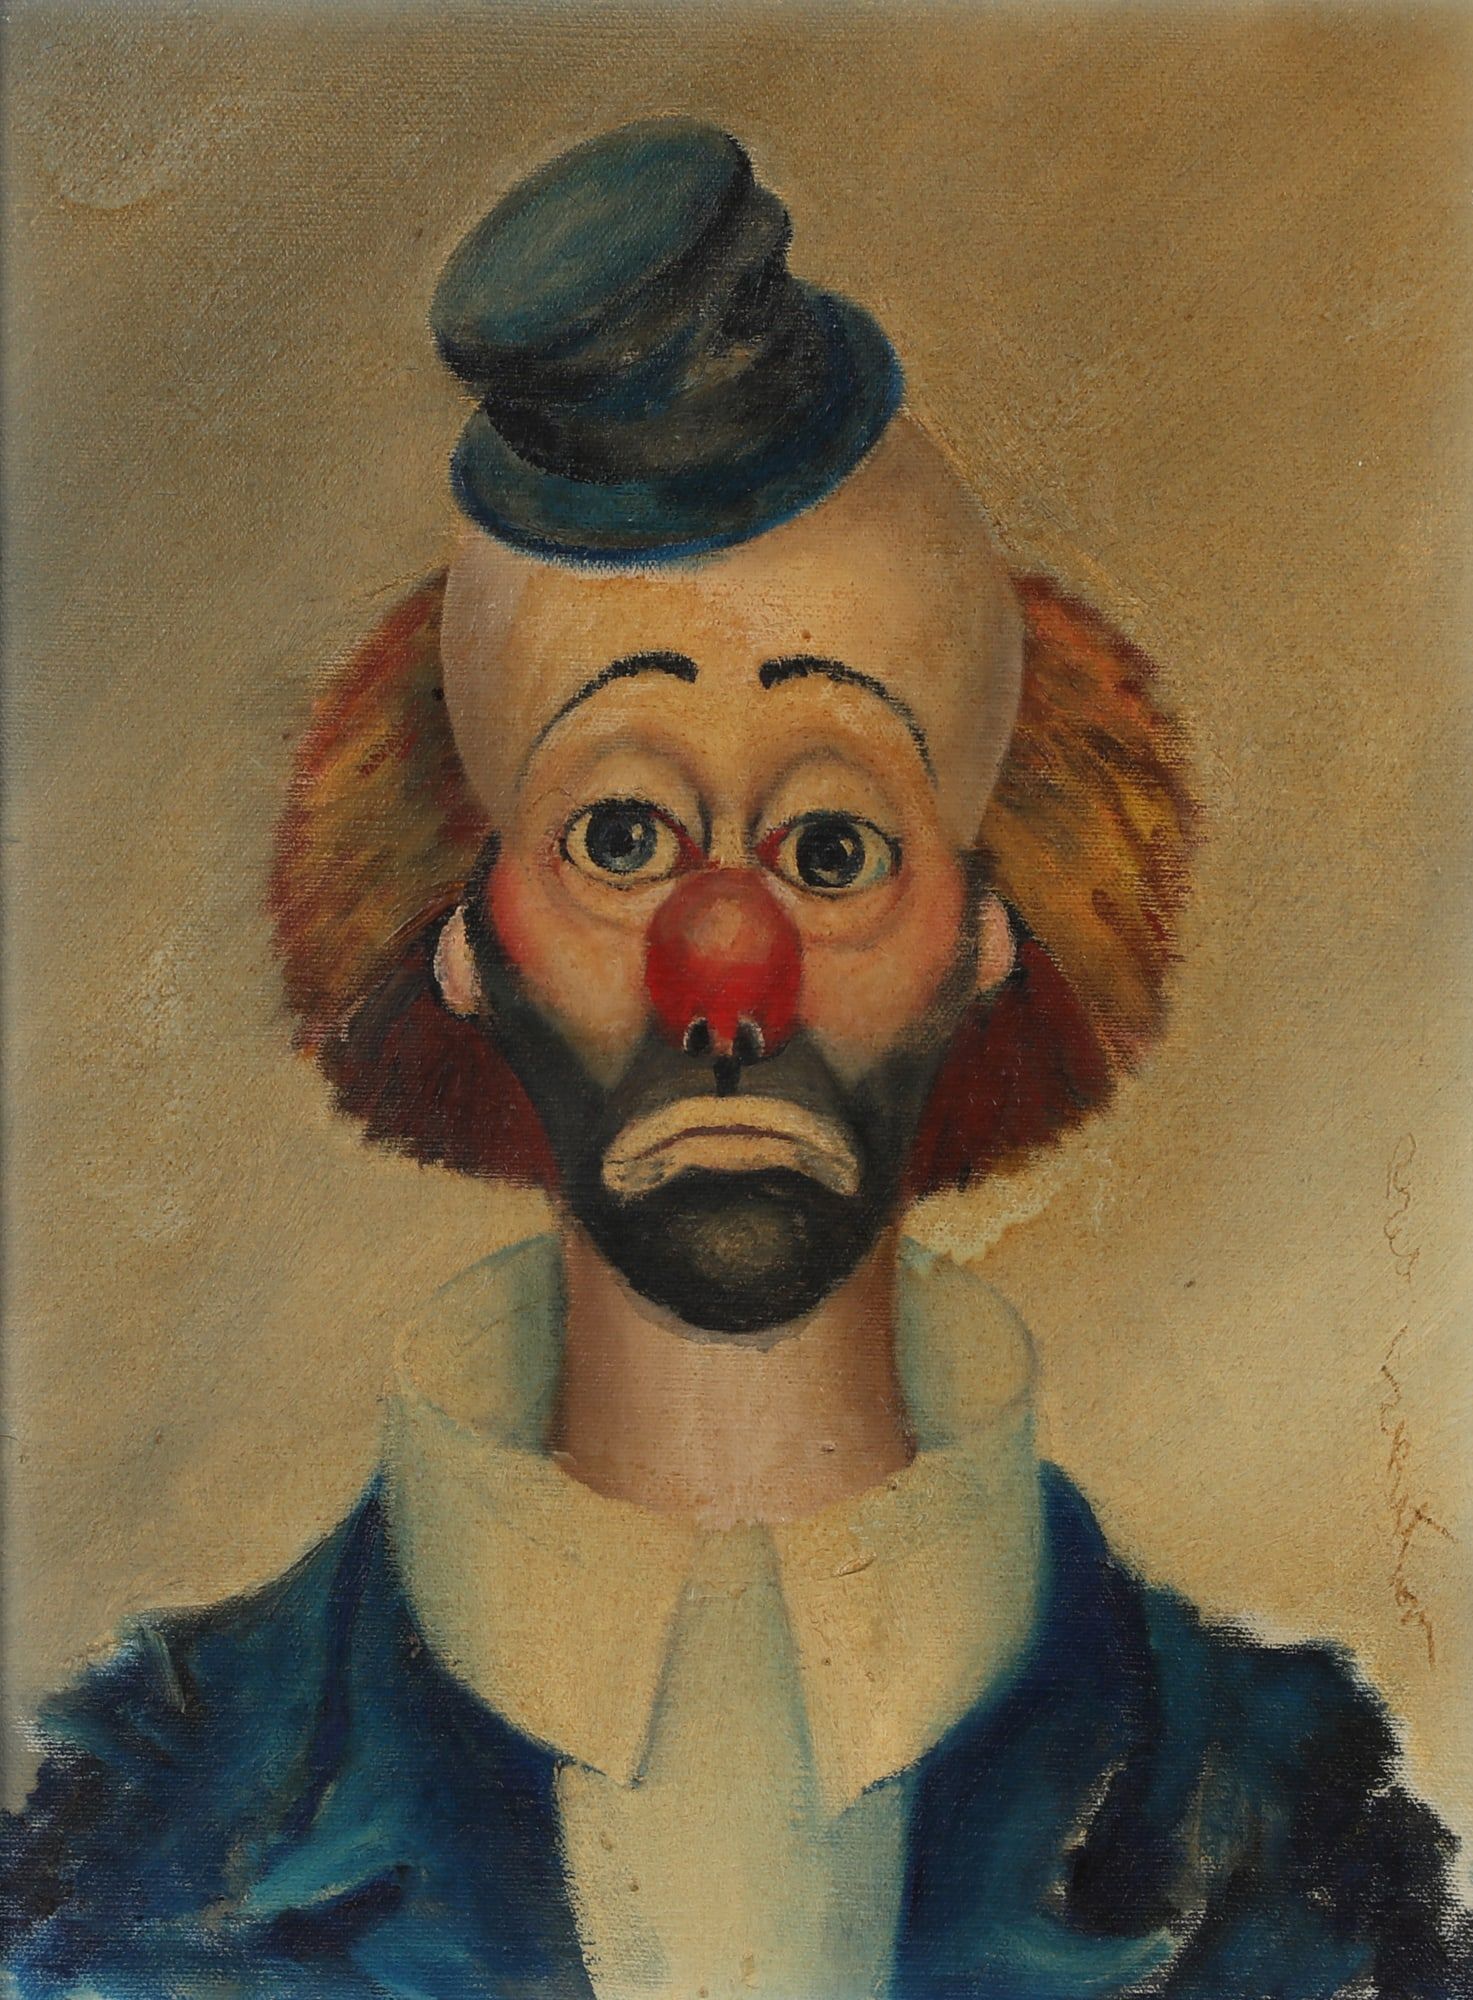 RED SKELTON CLOWN WITH A BLUE 2fb4270